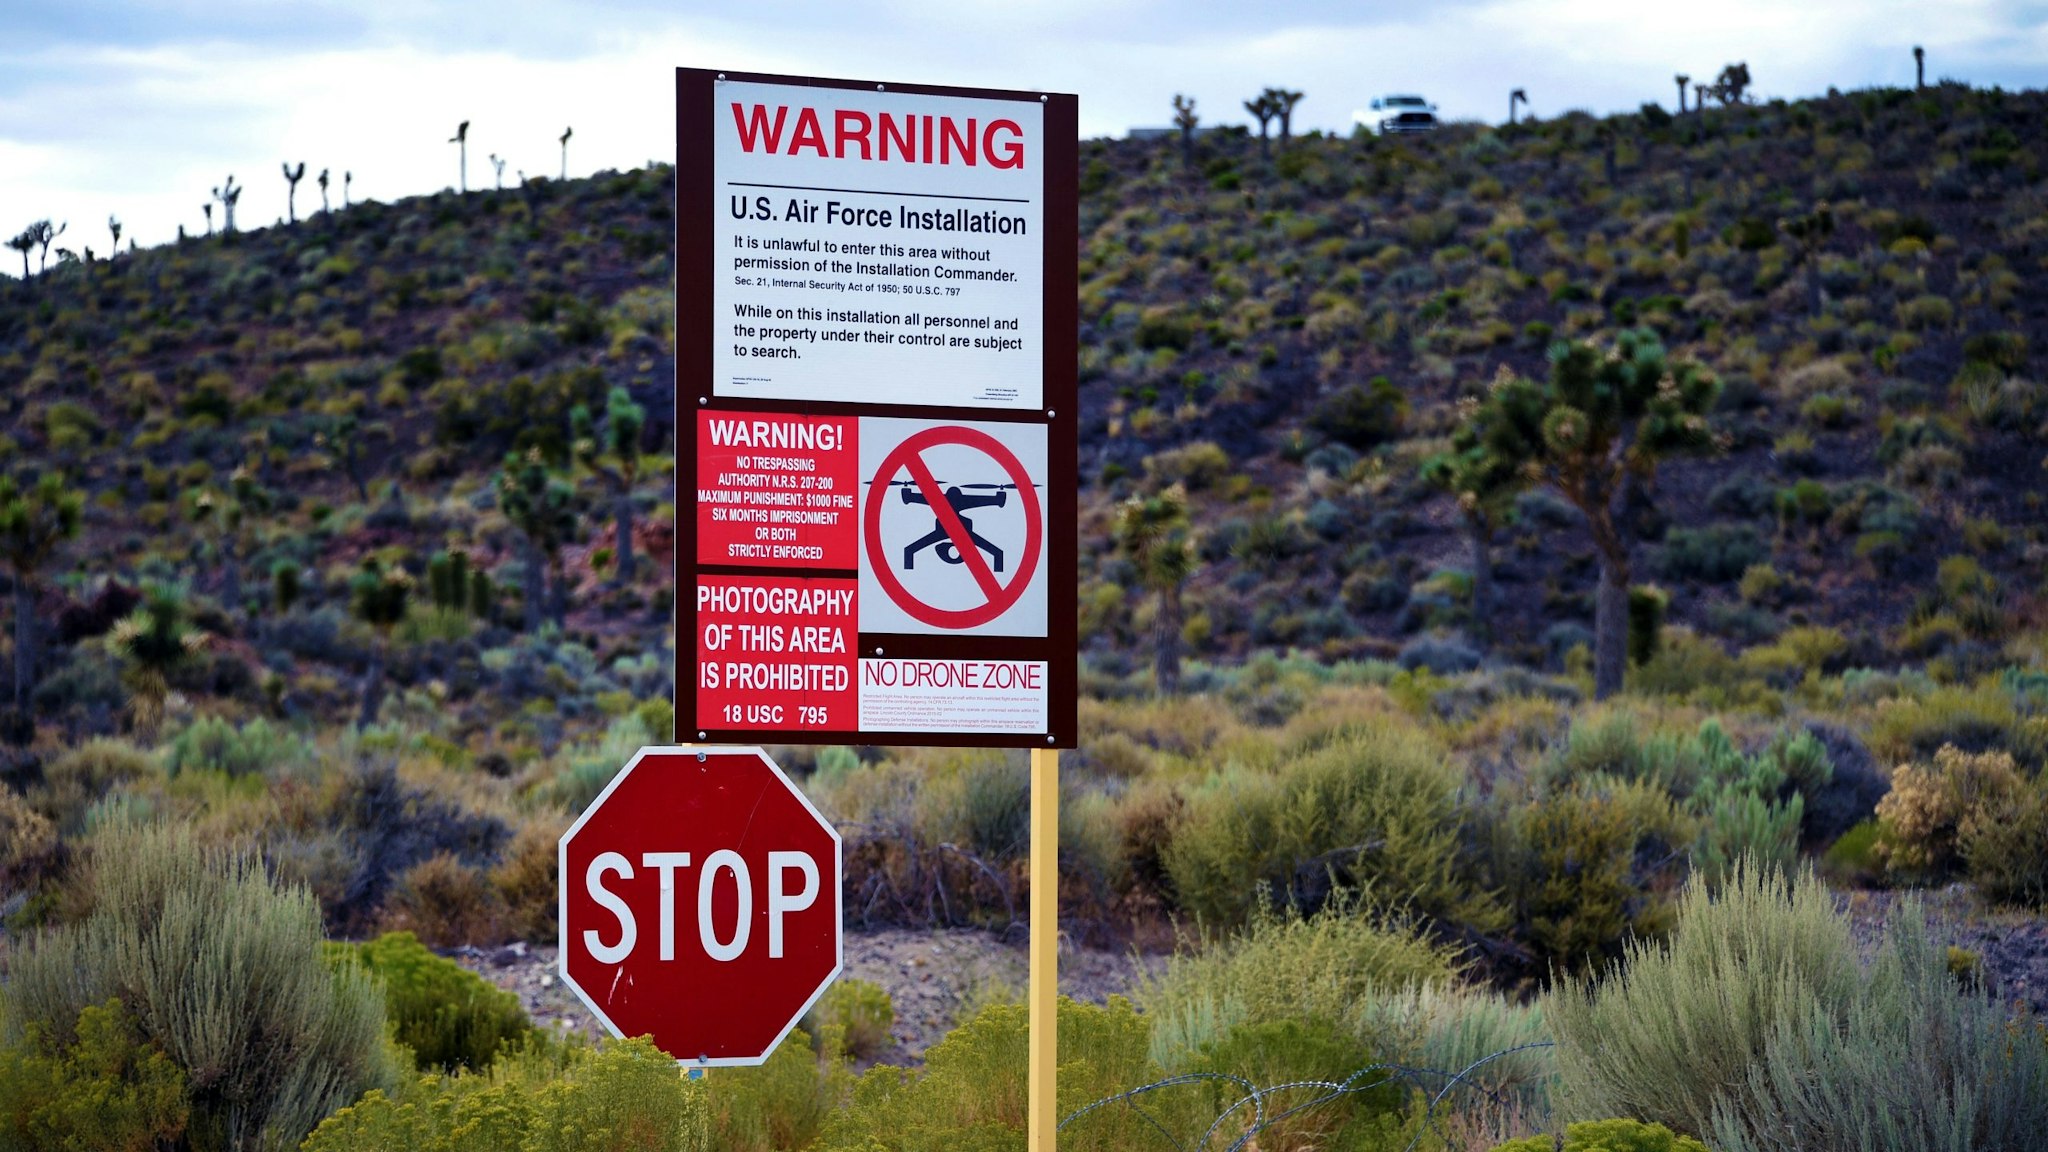 RACHEL, NEVADA - JULY 22: A warning sign is posted at the perimeter of the top-secret military installation at the Nevada Test and Training Range known as Area 51 on July 22, 2019 near Rachel, Nevada. A Facebook event entitled, "Storm Area 51, They Can't Stop All of Us," which the author stated was meant as a joke, calls for people to storm the highly classified U.S. Air Force facility on September 20, 2019, to address a conspiracy theory that the U.S. government is conducting tests with space aliens.